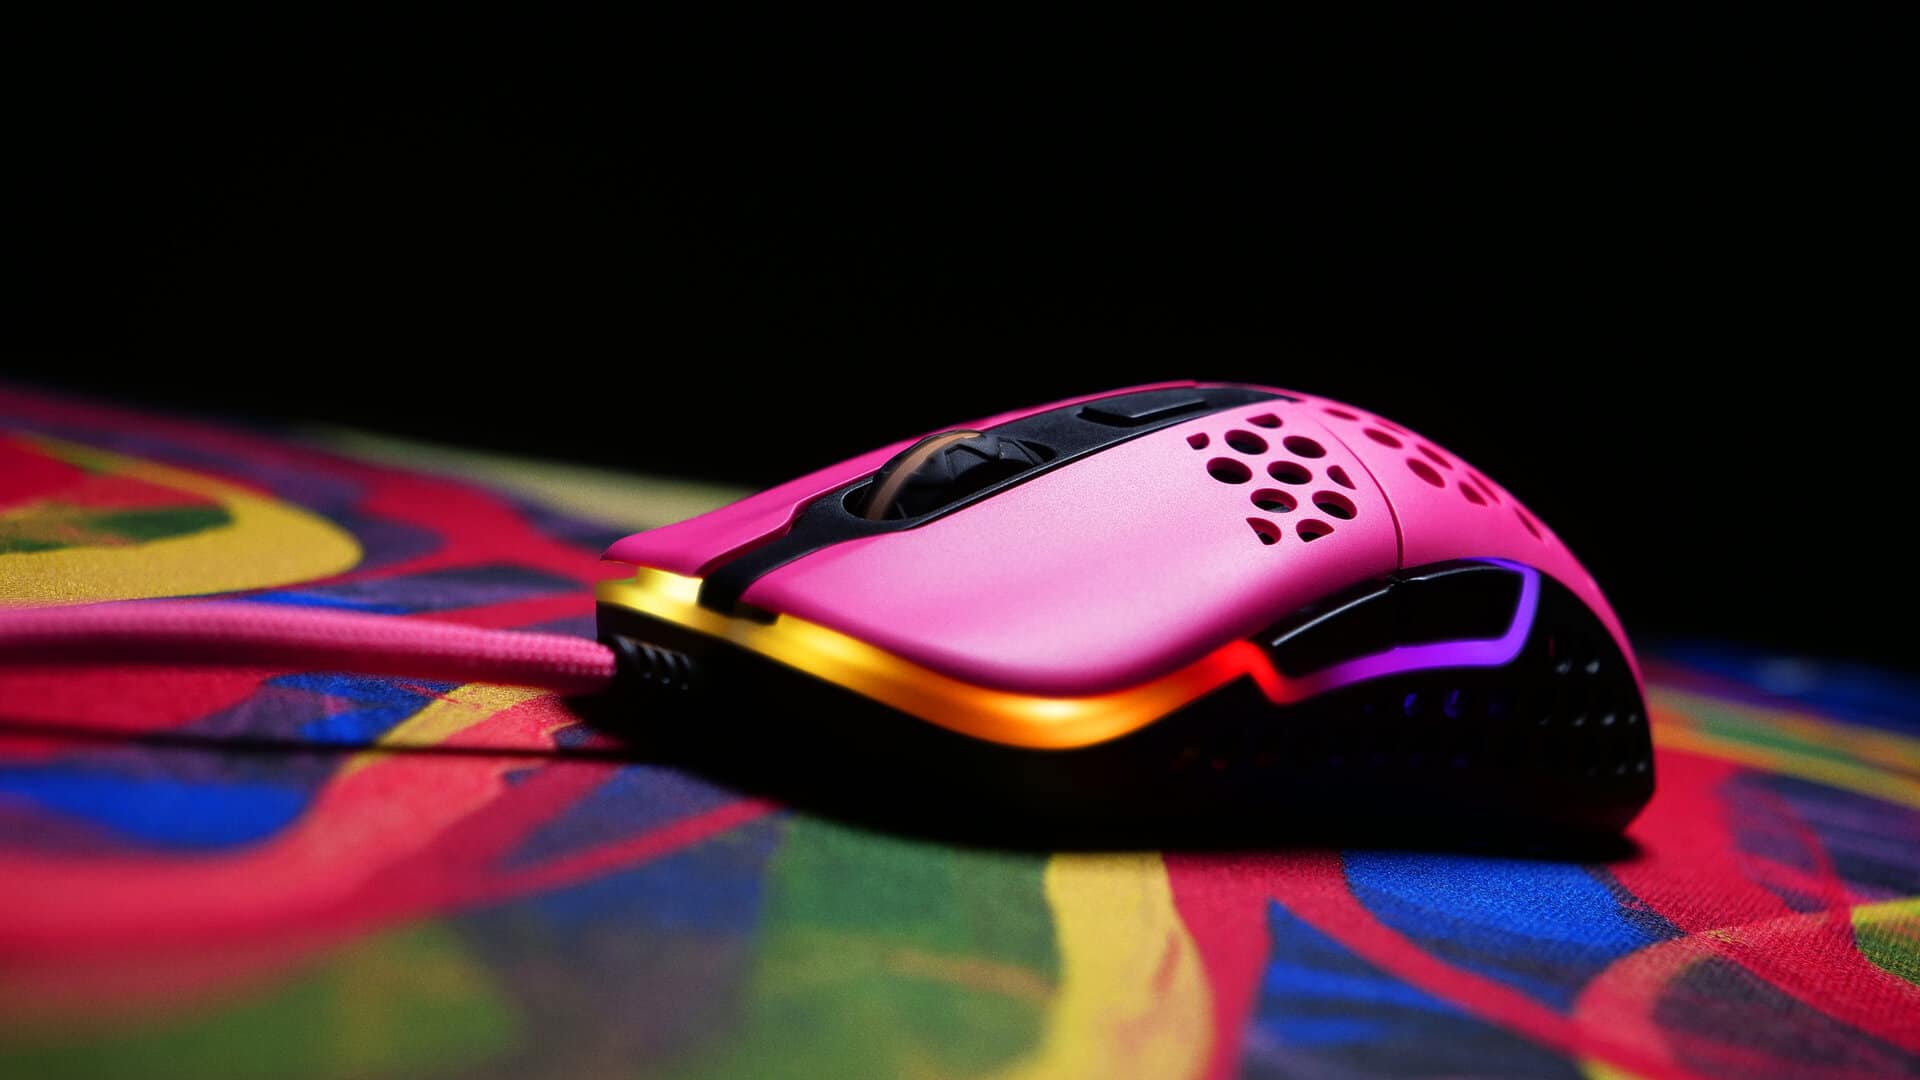 Xtrfy Brings Color Into Play With The New M42